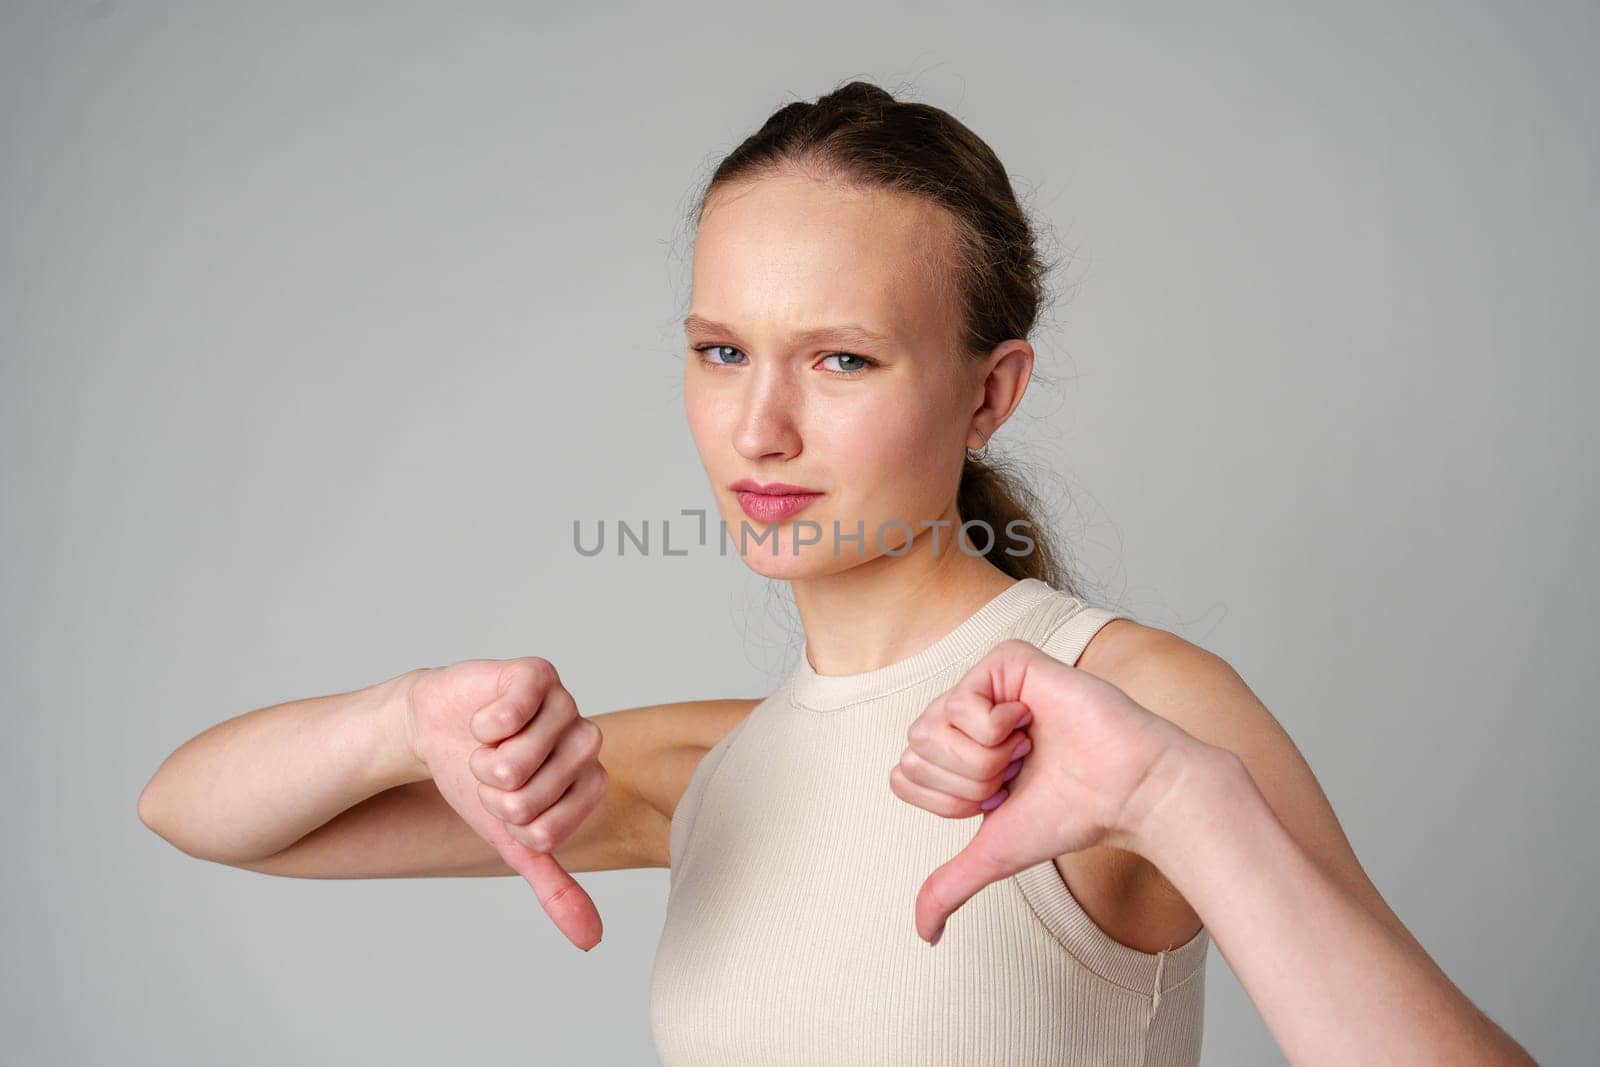 Young Woman Giving Thumbs Down Gesture Against a Neutral Background. by Fabrikasimf